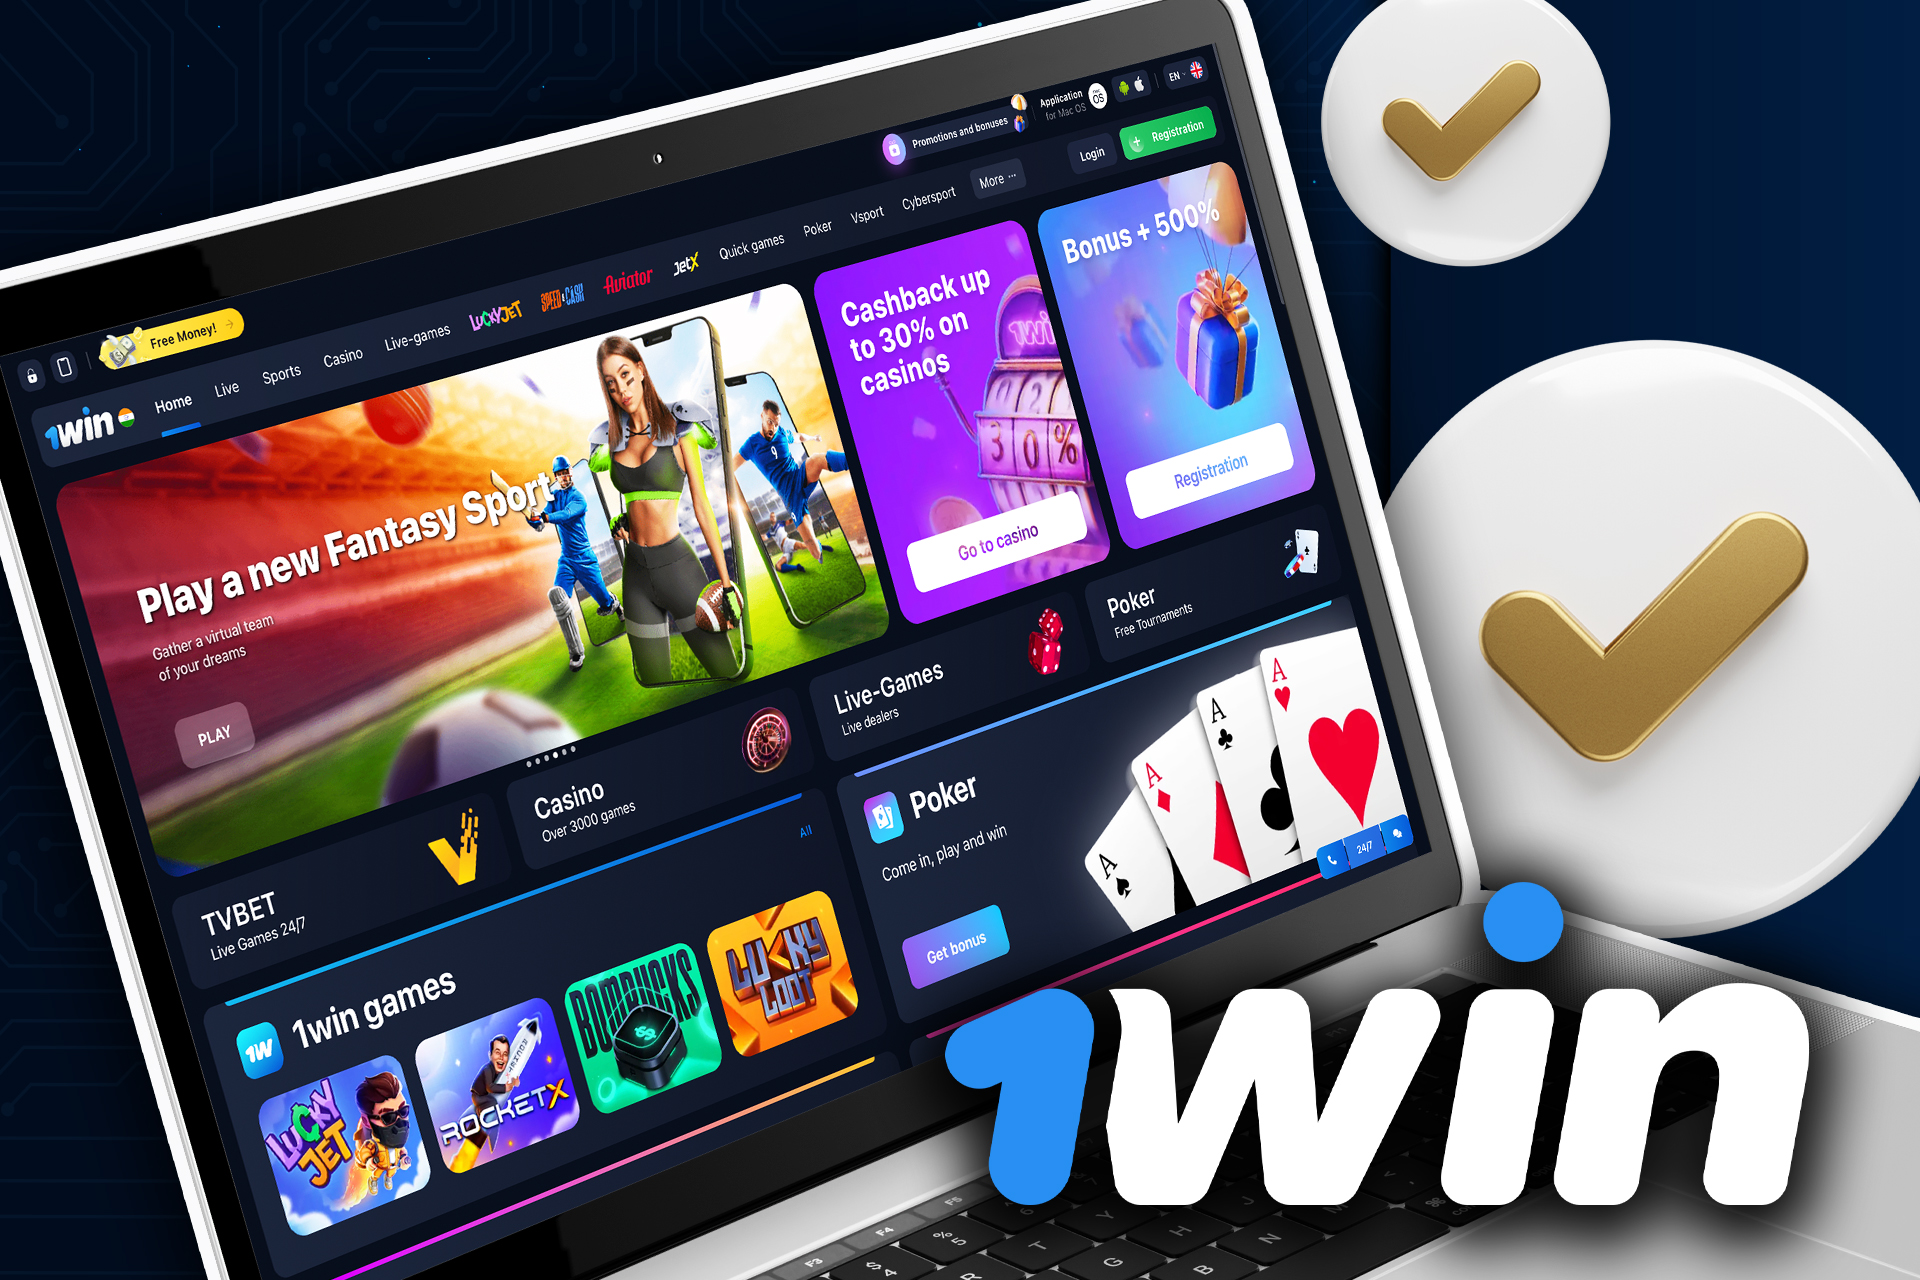 1win has a huge sportsbook with a wide line of sports markets, as well as online casino with various slots and table games.